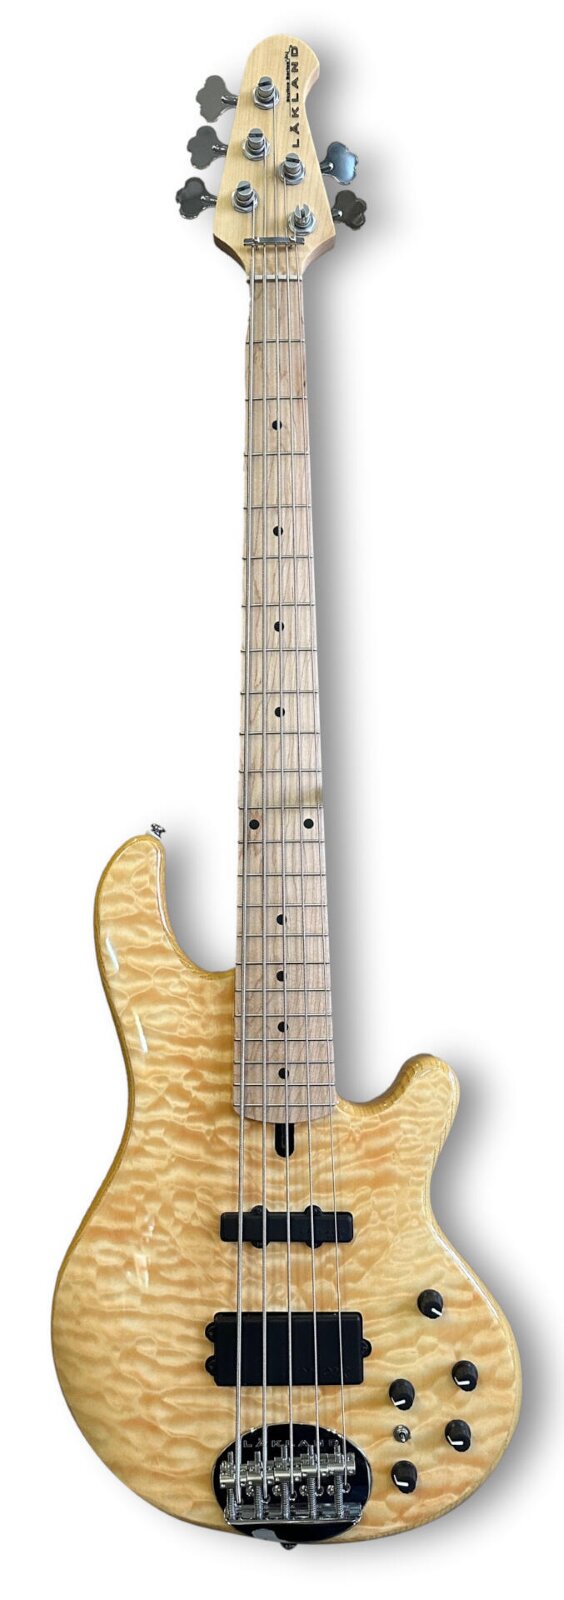 LAKLAND Skyline 55-02 Deluxe Bass, 5-Saiter - Quilted Maple Top, Natural Gloss : photo 1